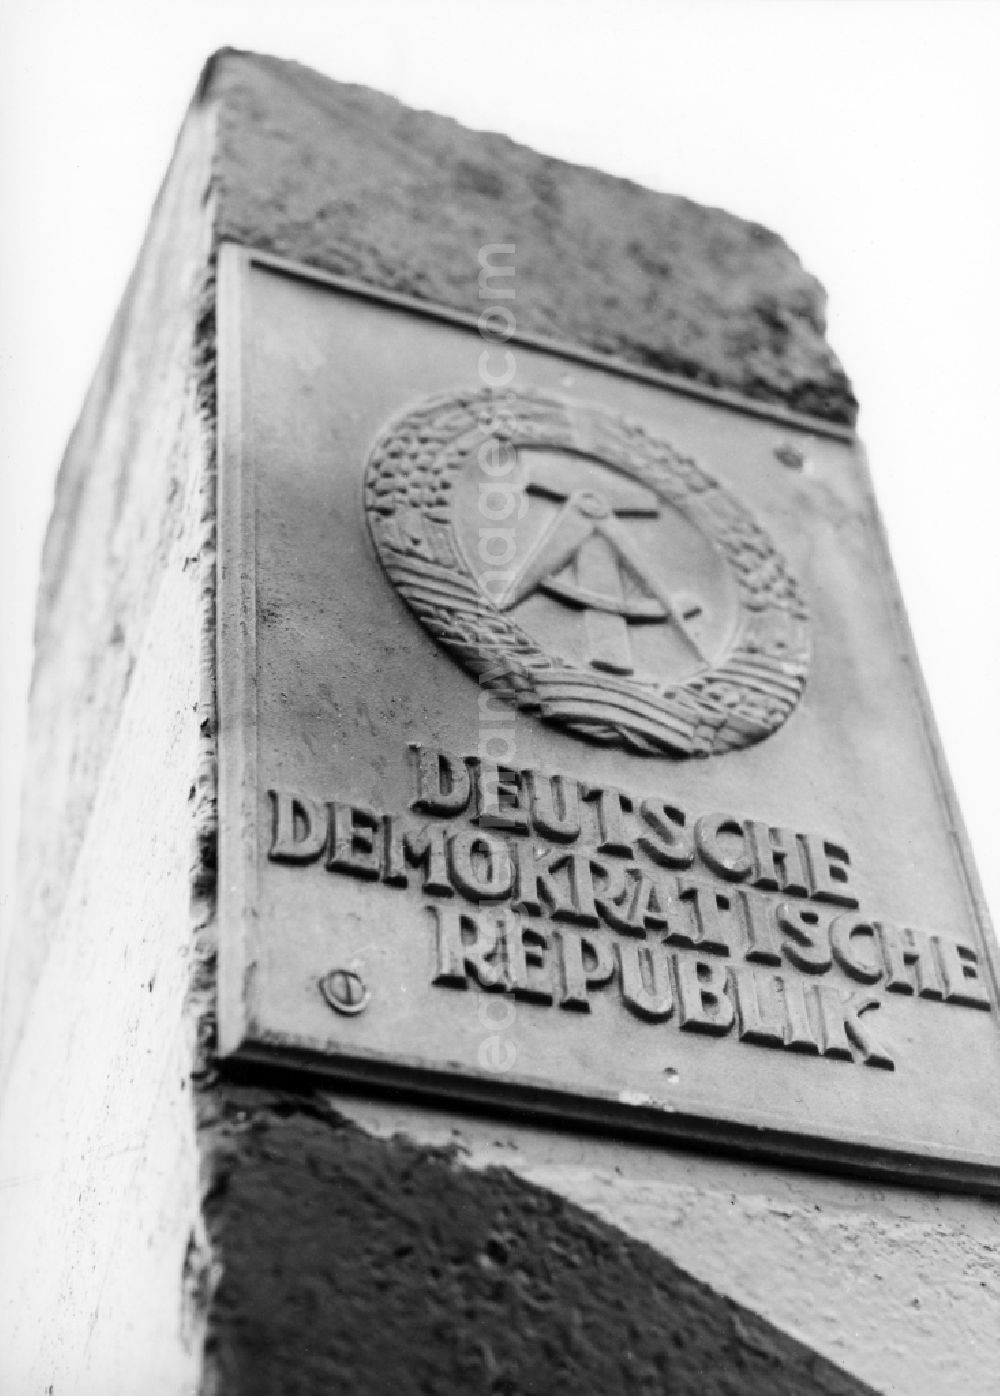 GDR picture archive: Abbenrode - Landmark with gray cast iron board of the GDR at the border to West Germany near Abbenrode in today's state of Saxony-Anhalt. The photo shows a concrete column with gray cast iron board, which includes the state emblem of the GDR hammer, circle and wreath of honor and the inscription German Democratic Republic 